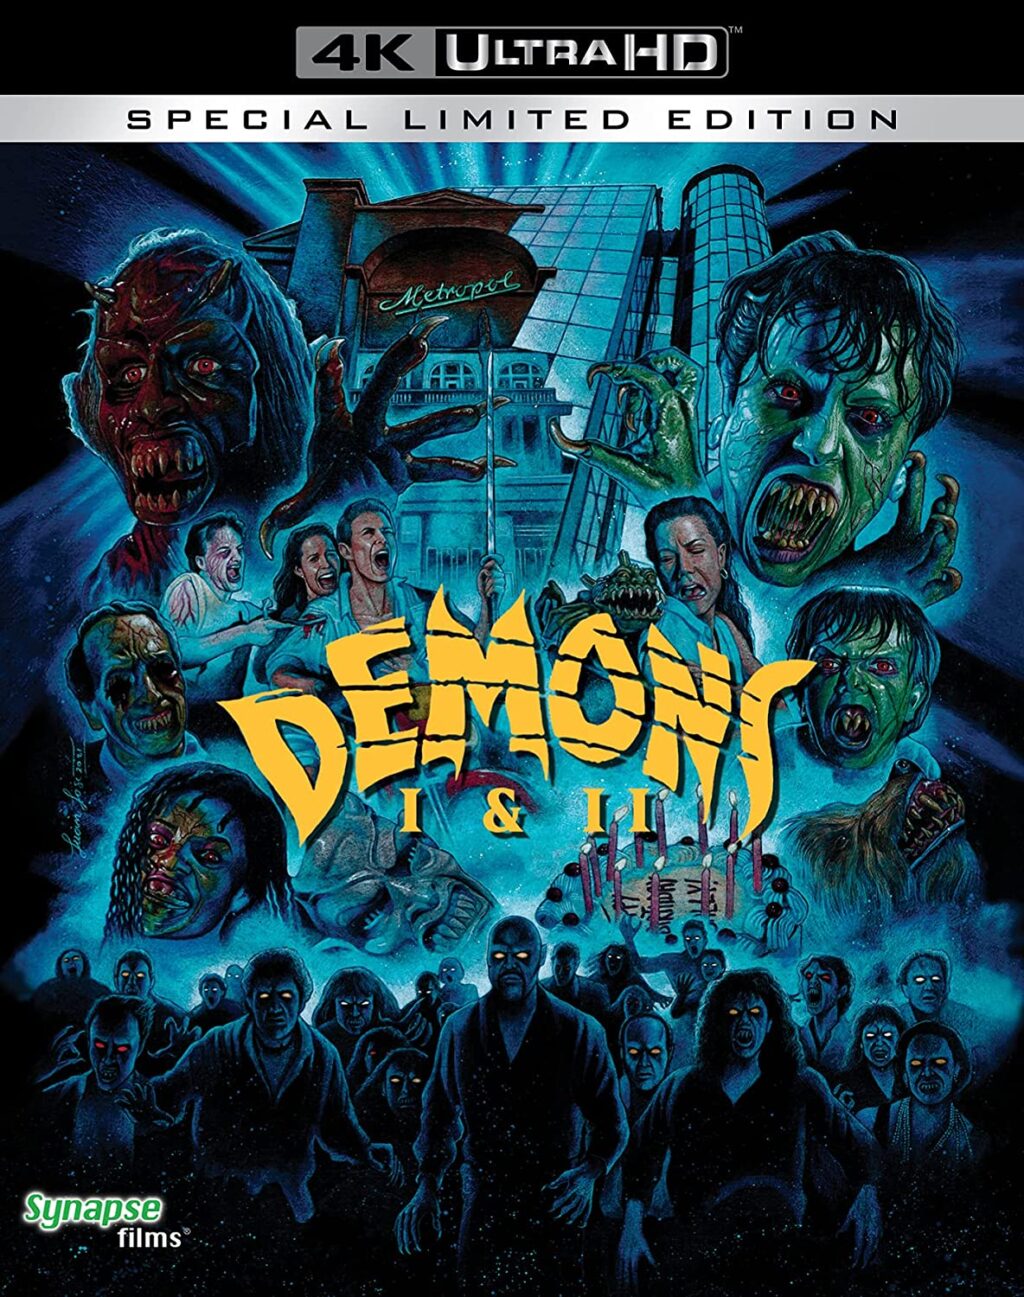 demons 4k 1024x1297 - 'Demons' & 'Demons 2' 4K Review: Sink Your Claws Into This Stunning Ultra HD Twofer